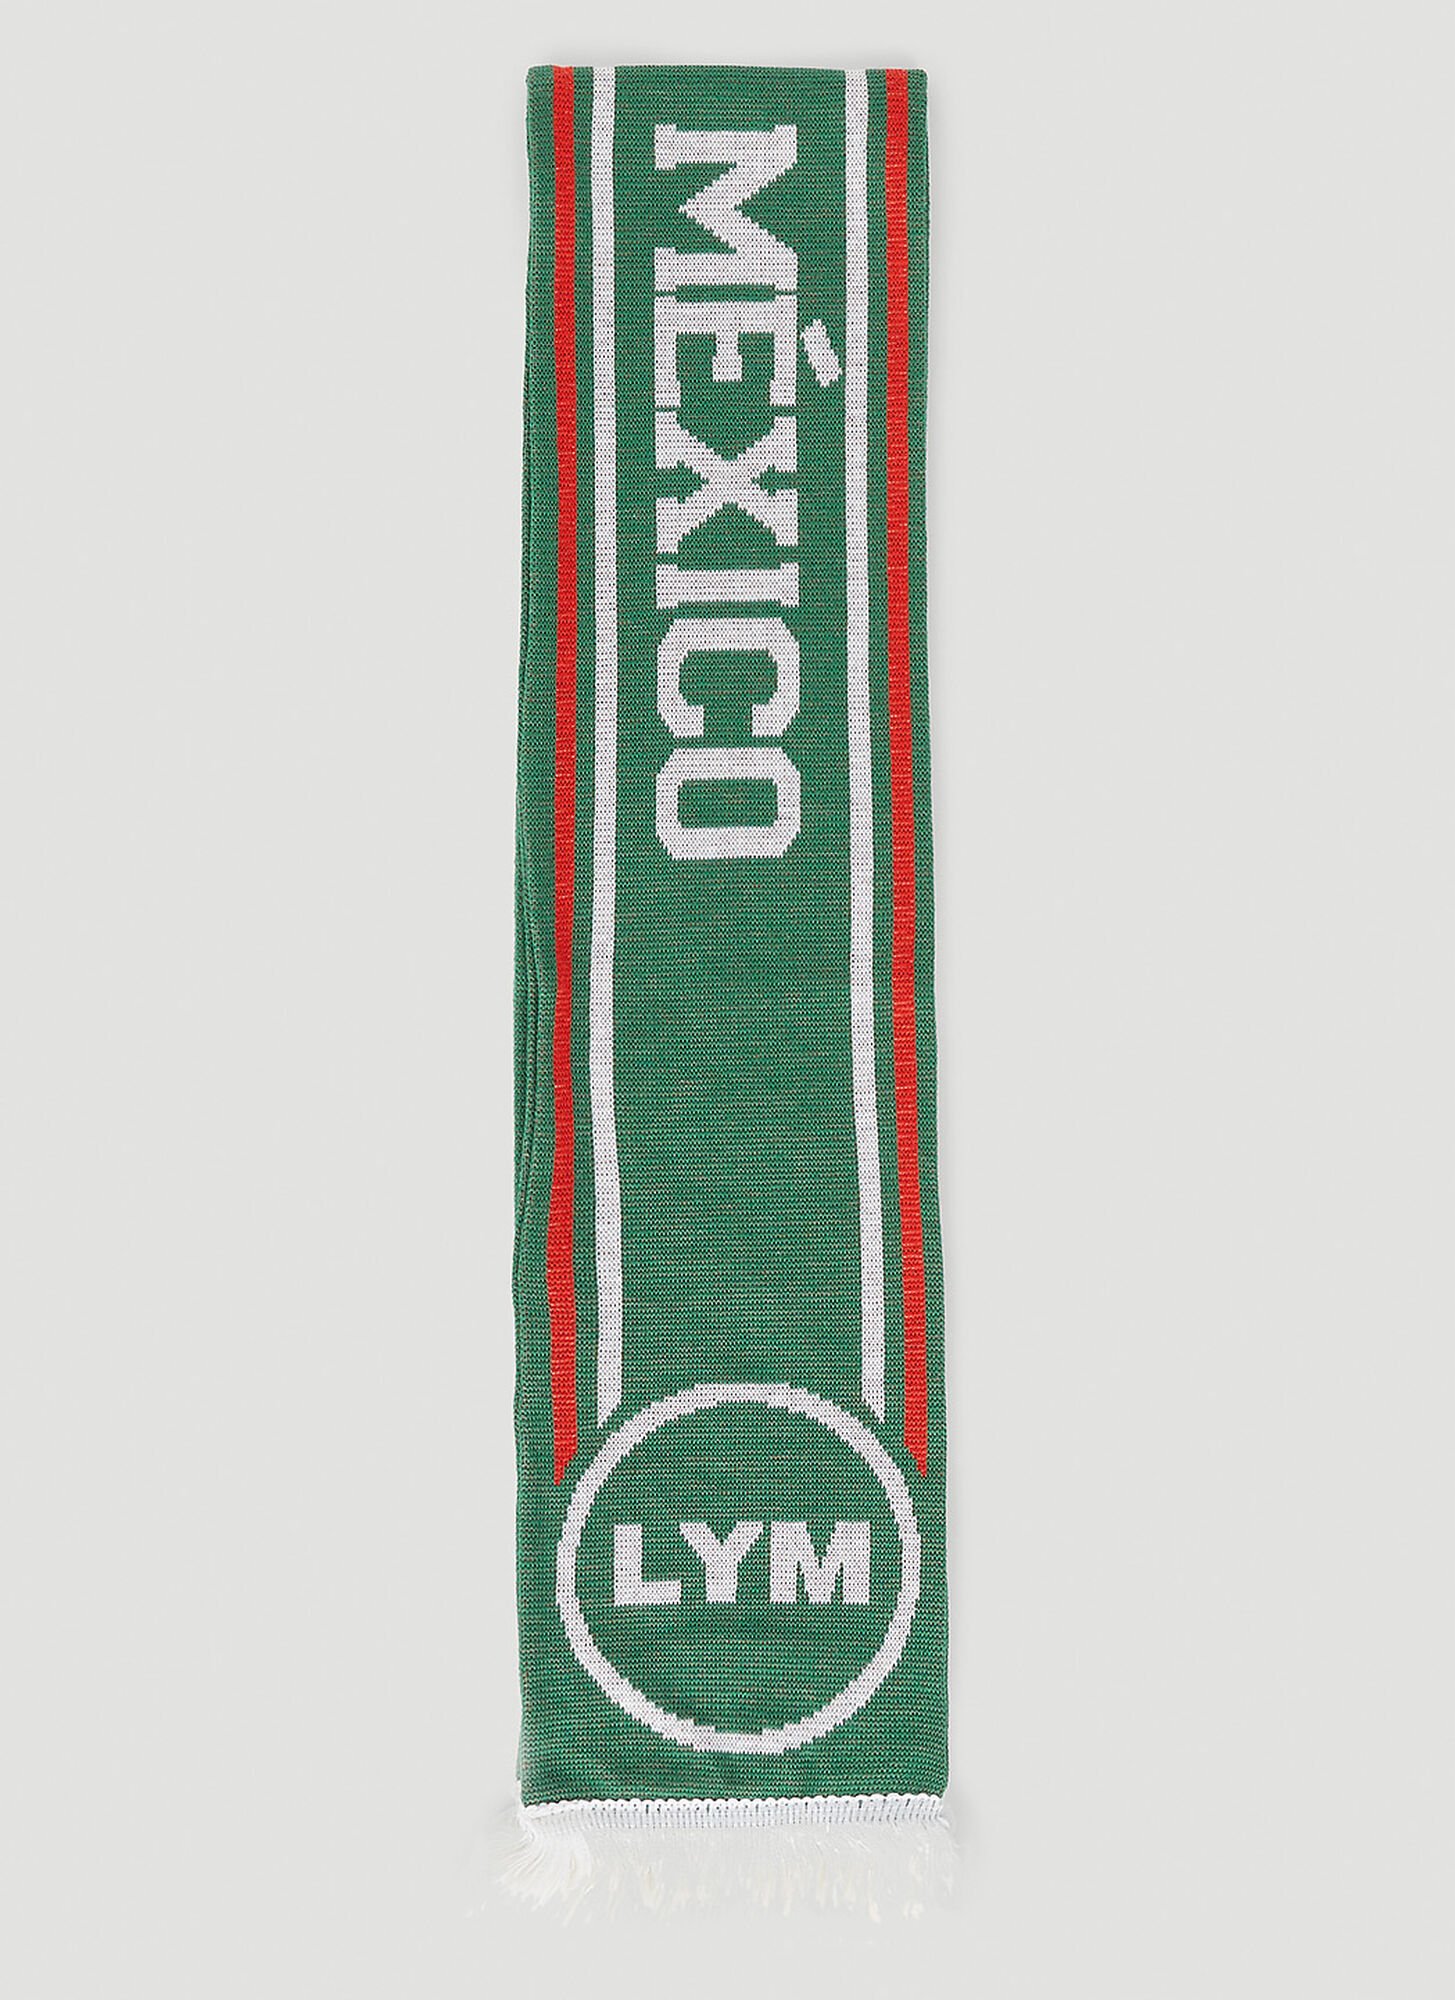 LIBERAL YOUTH MINISTRY FOOTBALL SCARF